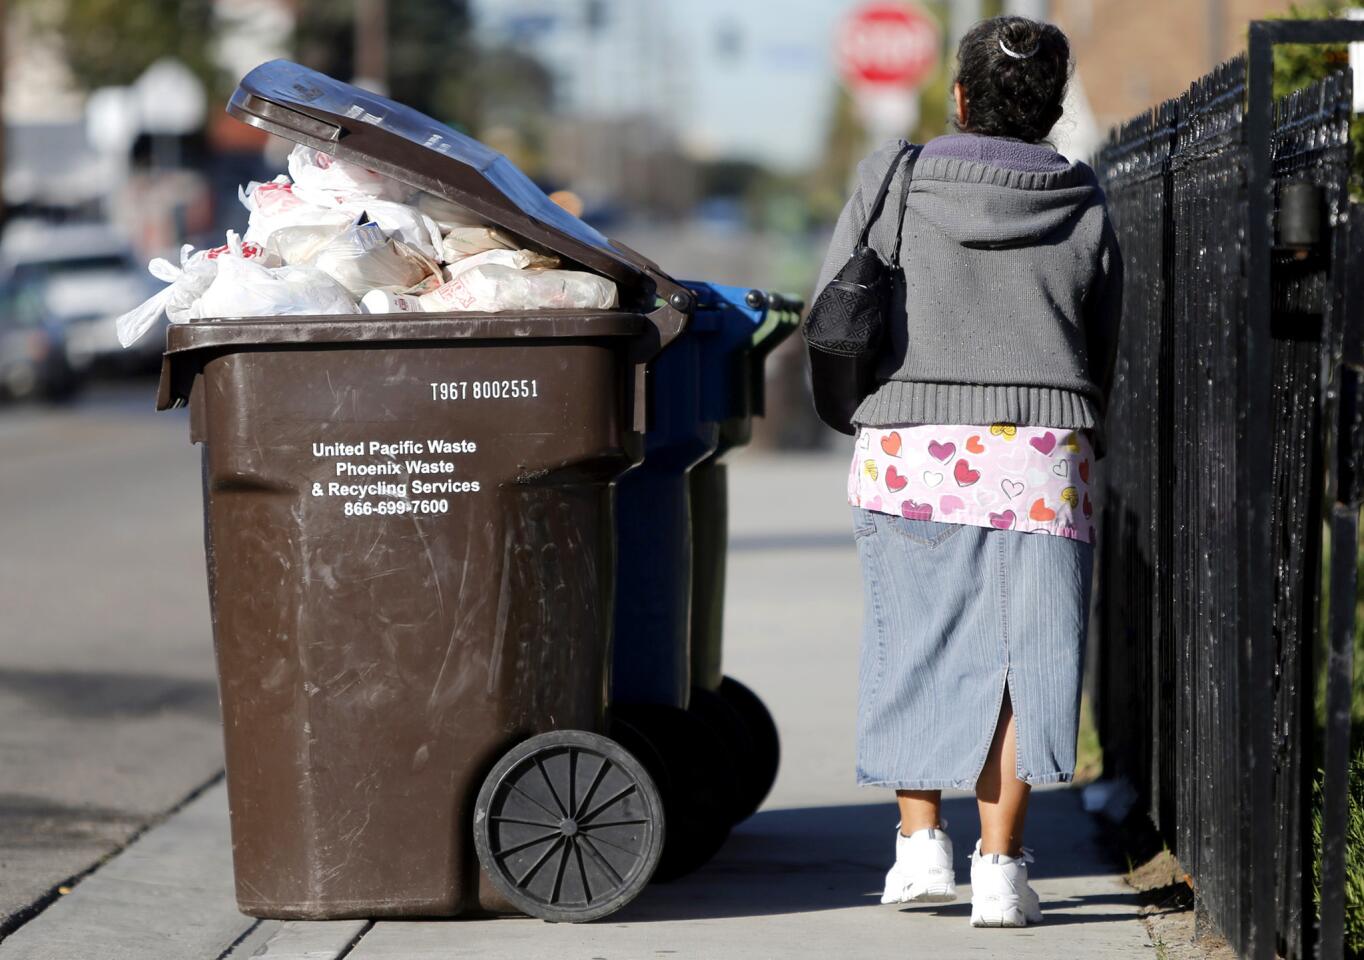 A pedestrian shares the sidewalk with a packed trash container.